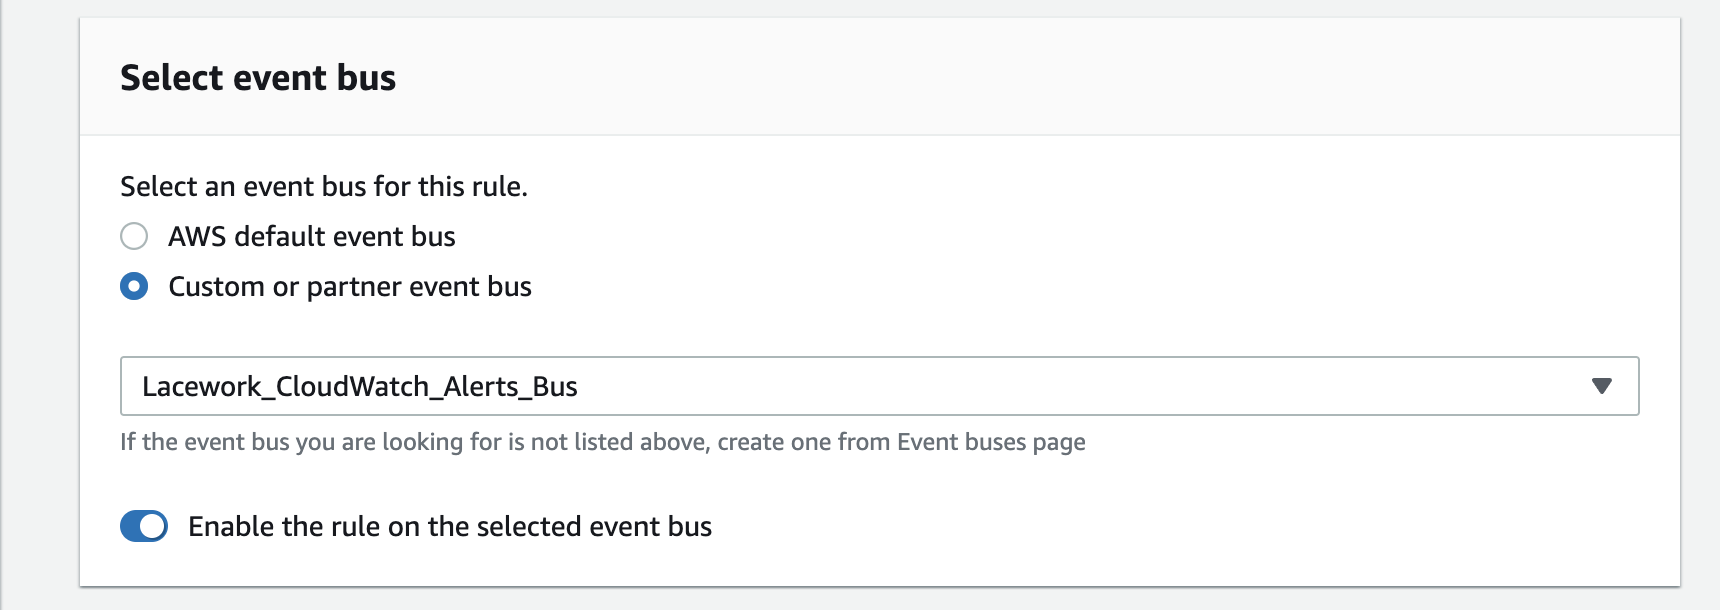 aws-create-event-rule-bus.png